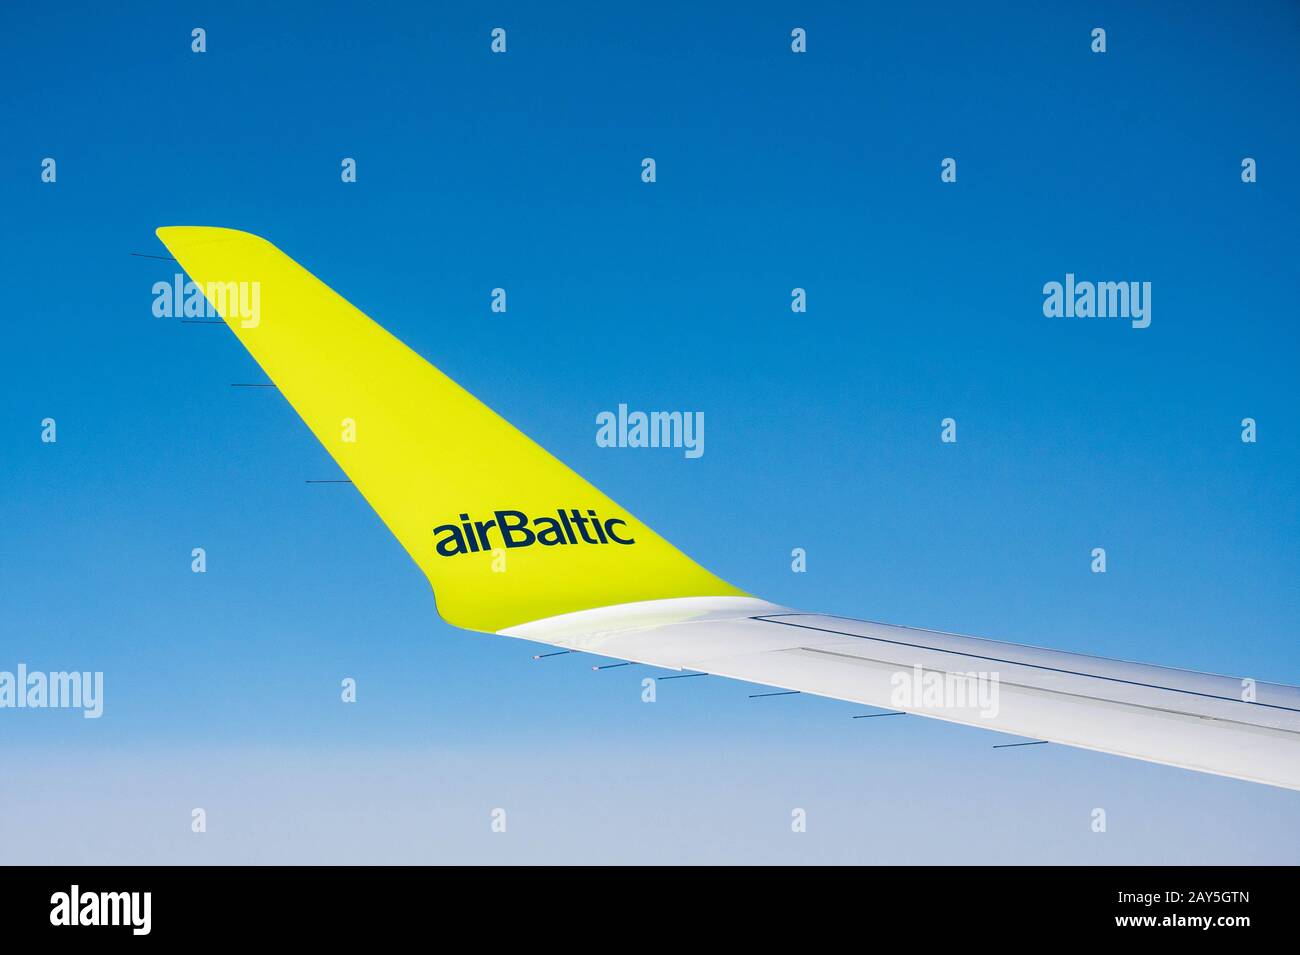 Part of a wing of the Boeing of Air Baltic airlines against the background of the blue sky during flight Stock Photo